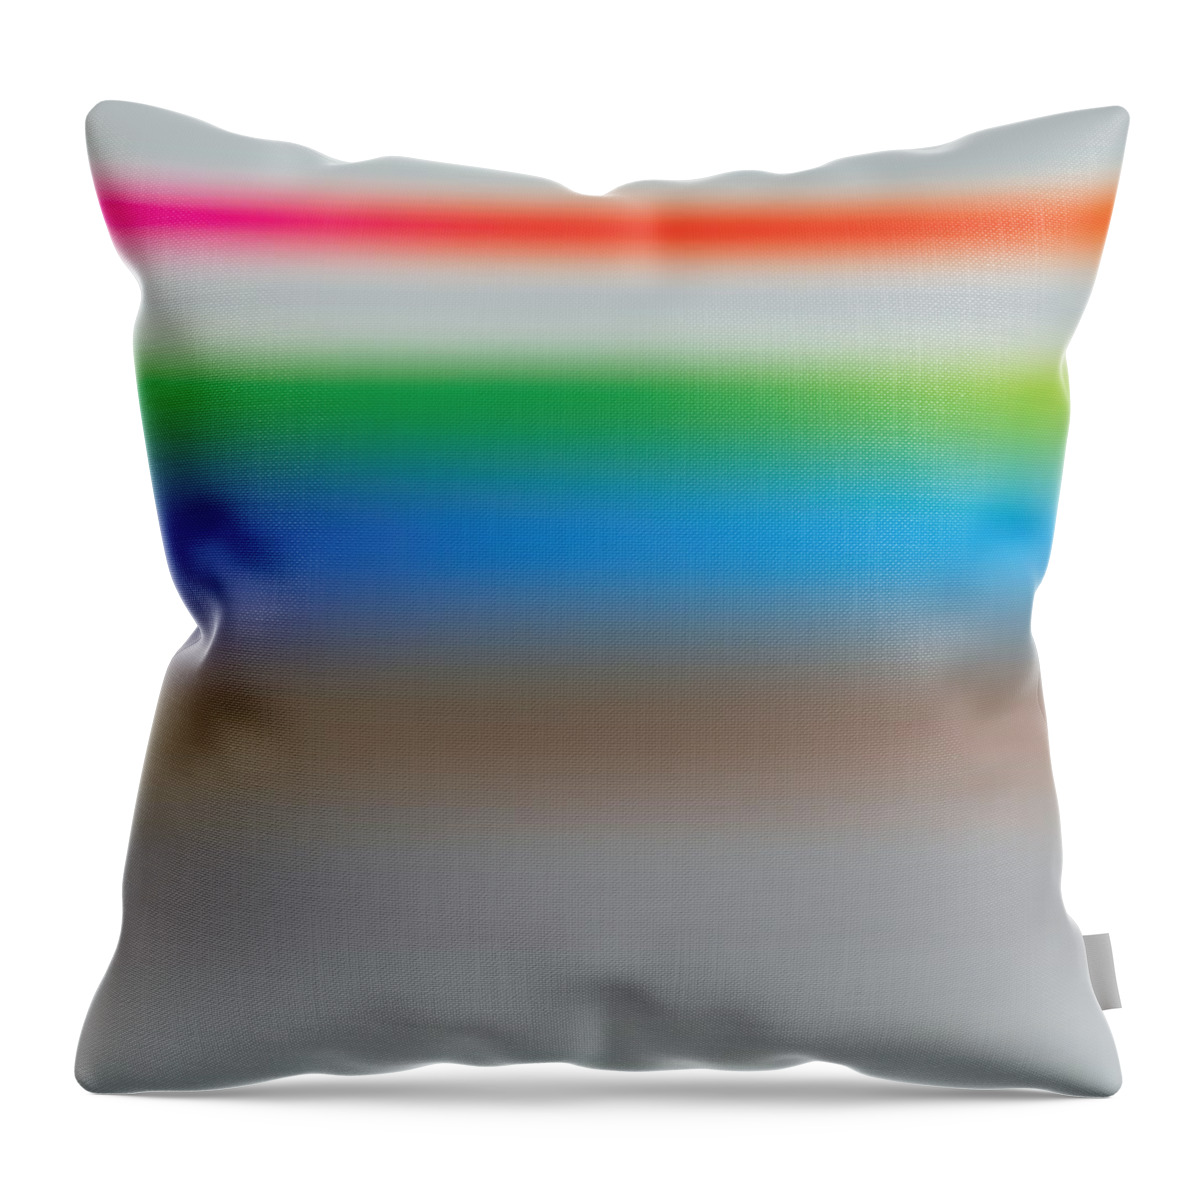 Rainbow Throw Pillow featuring the digital art Color Mist Stack by Kevin McLaughlin